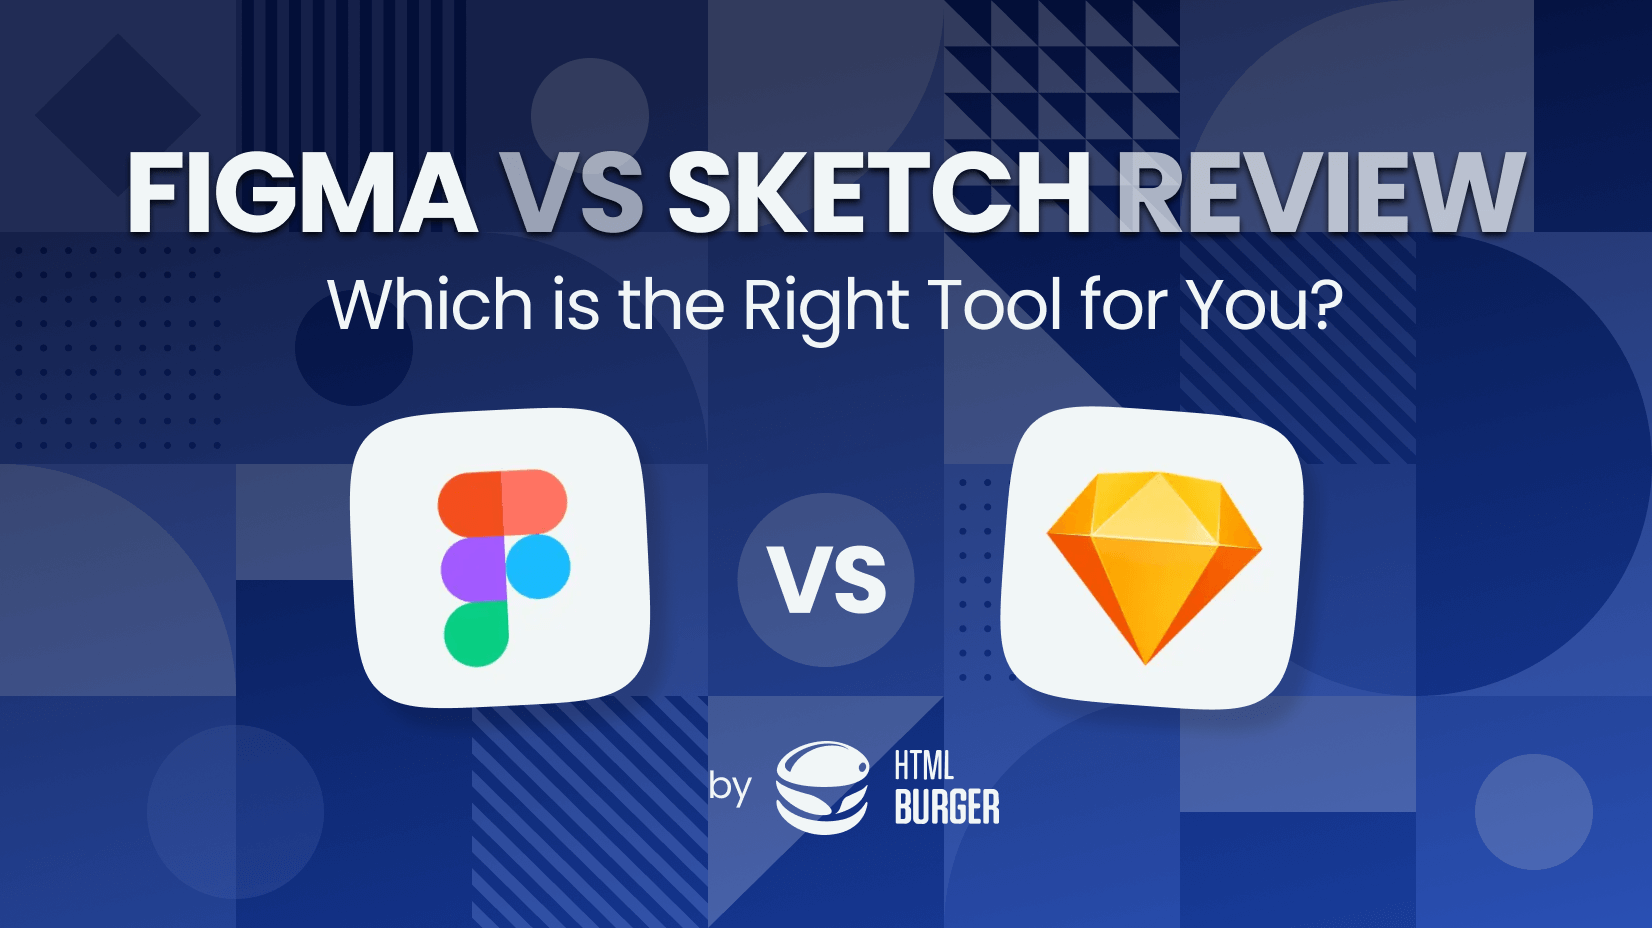 Figma vs. Sketch: Which Is The Better Design Tool?